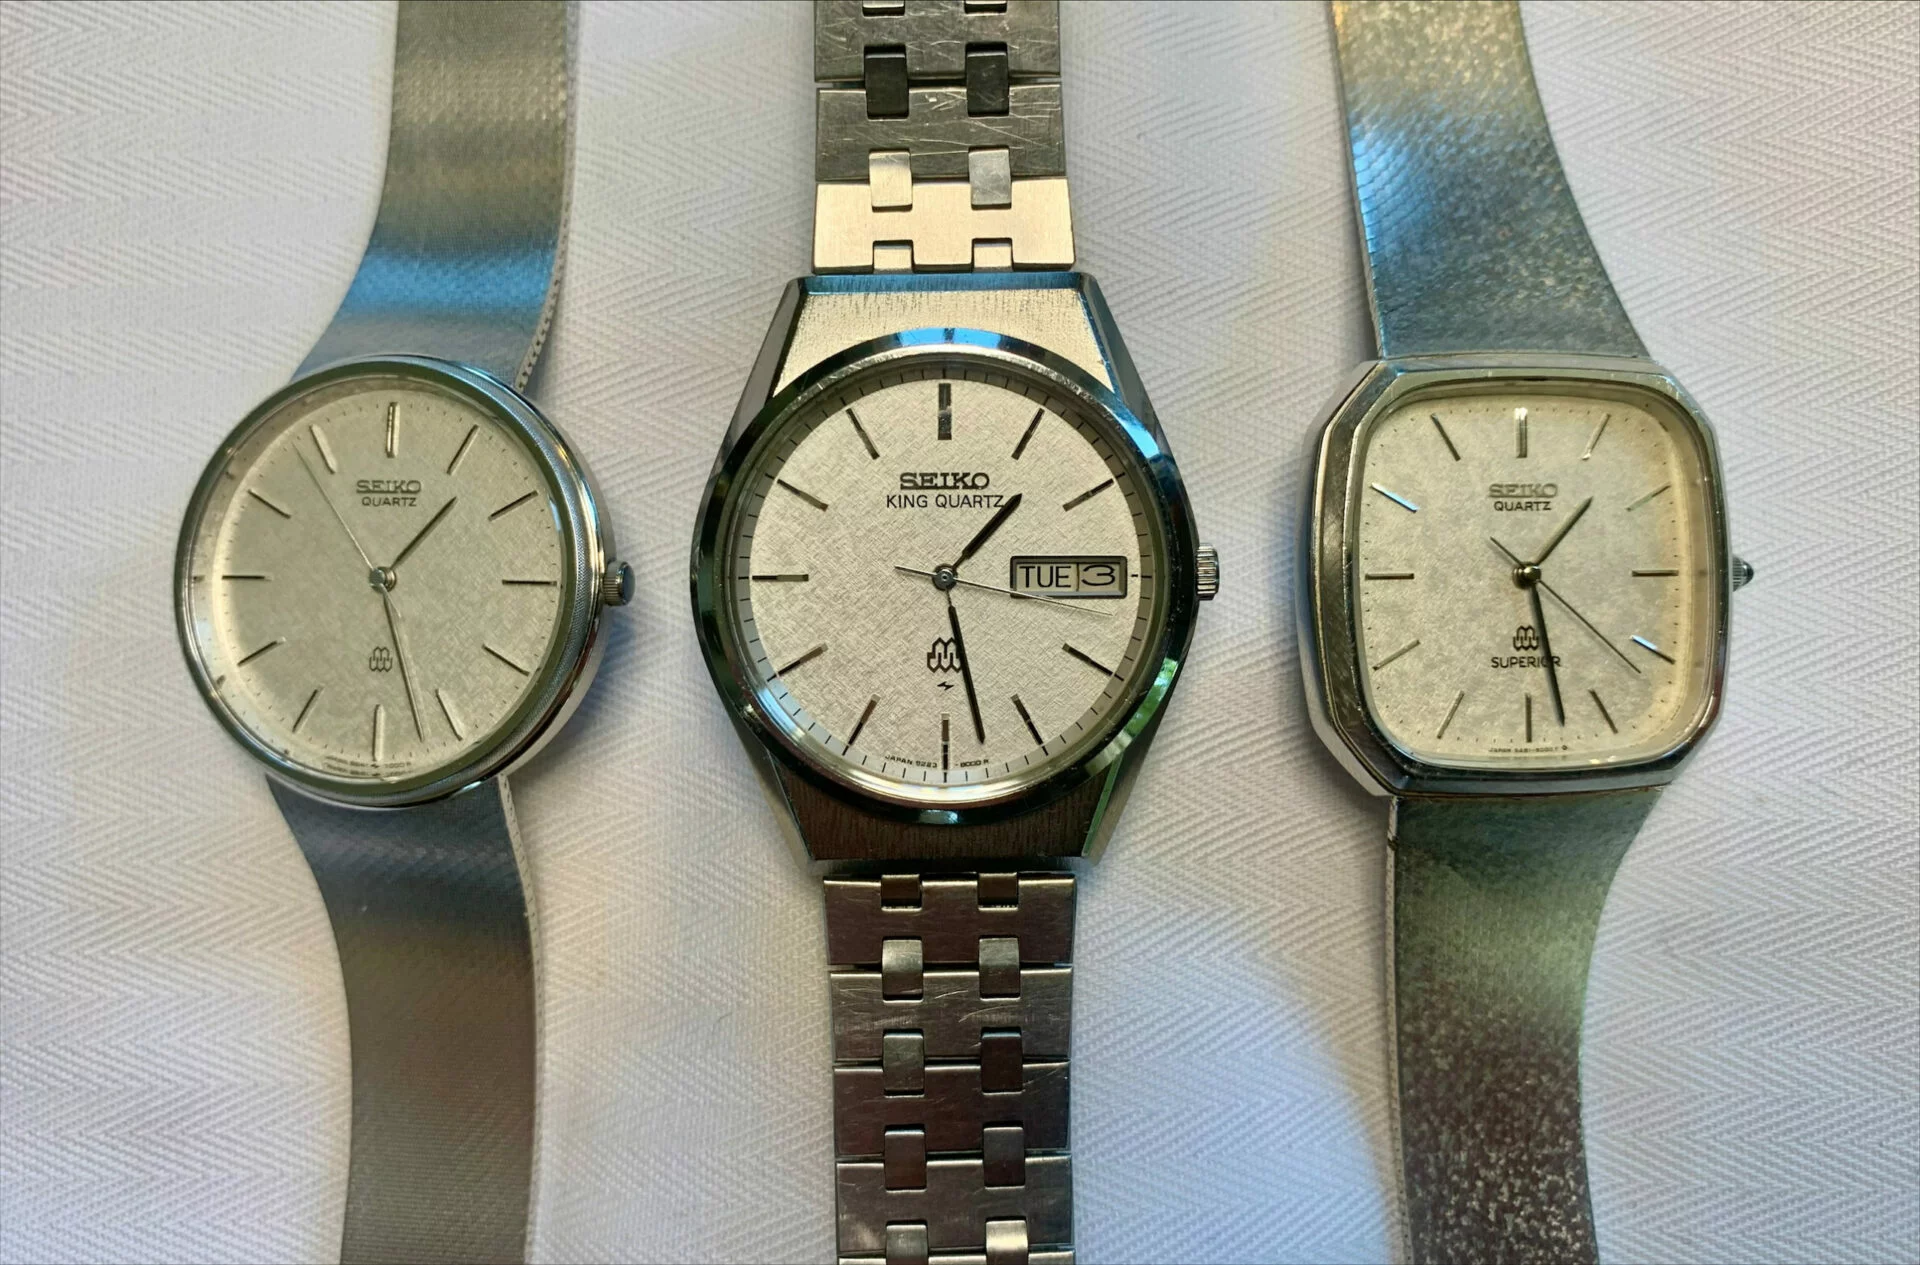 Vintage Seiko offering extraordinary accuracy that's flying under the radar